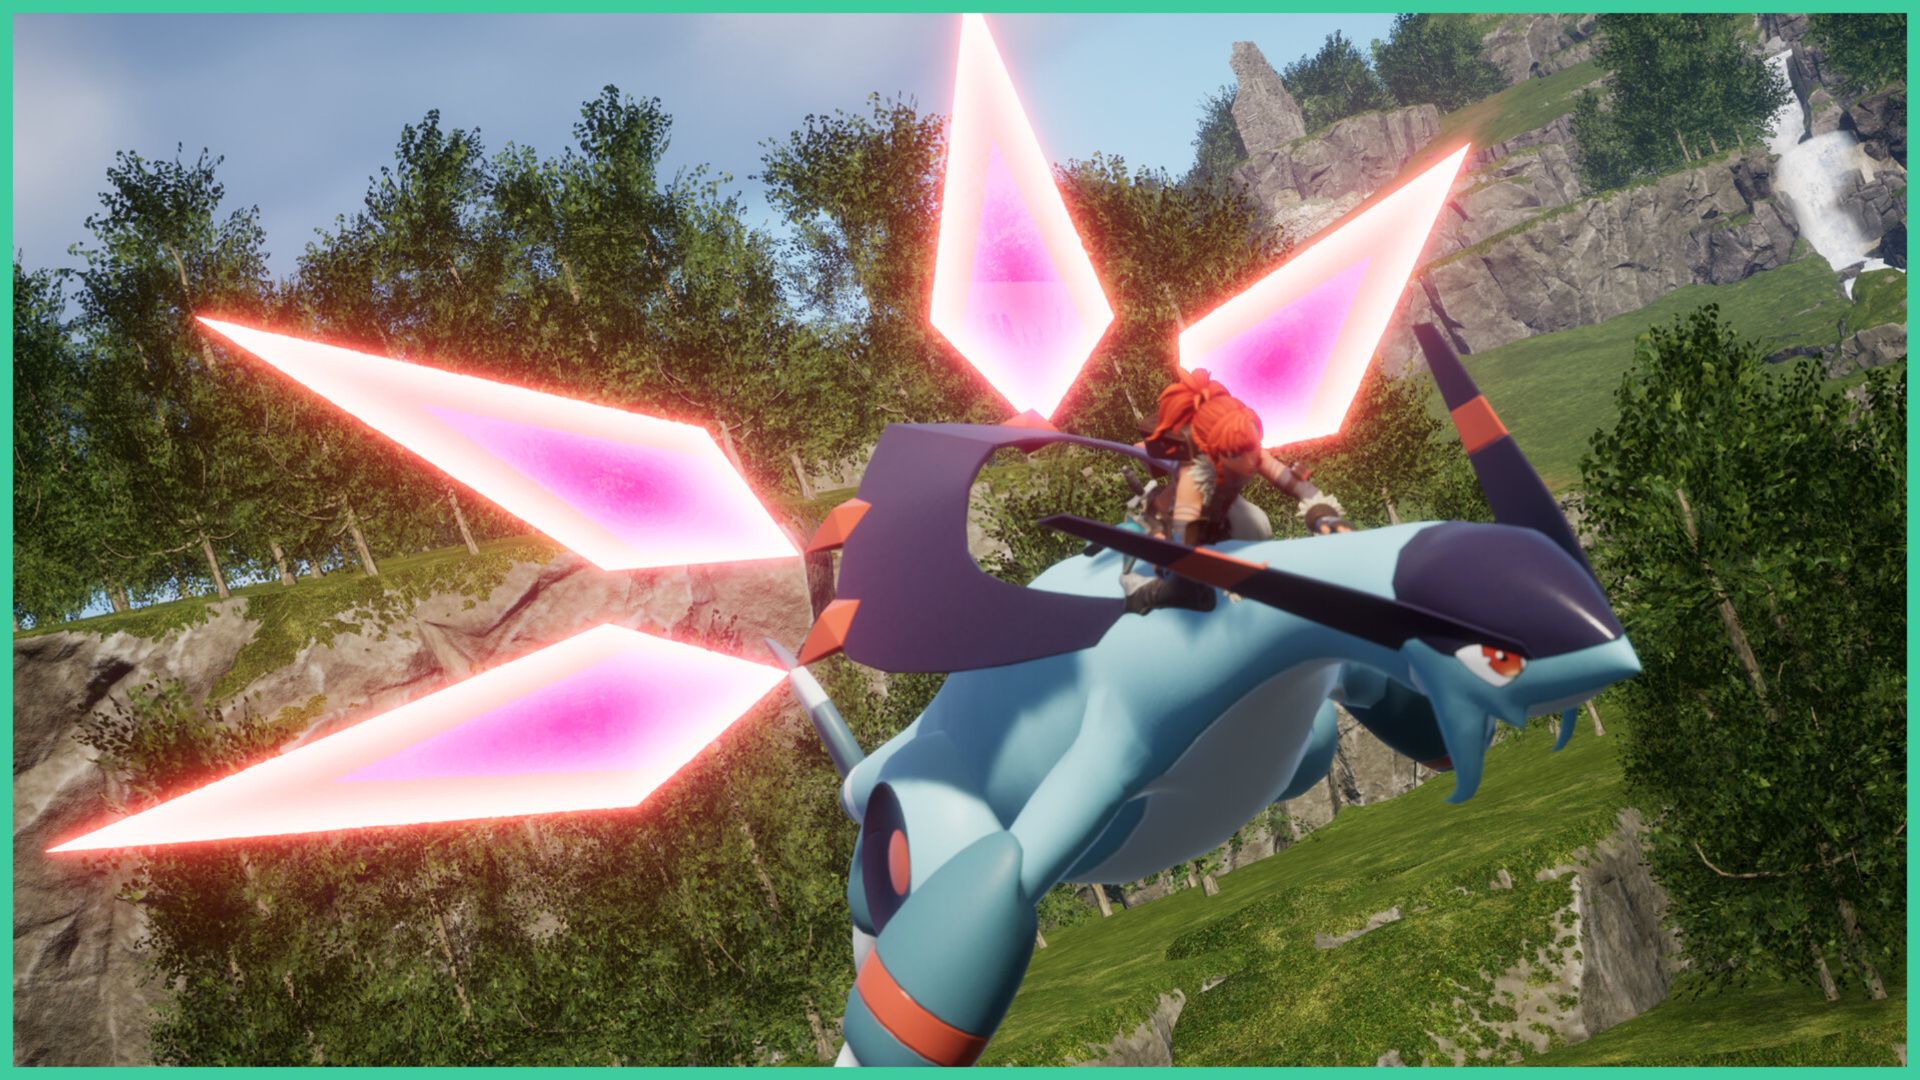 feature image for our palworld flying mount tier list, the image features a screenshot of a character flying on the back of a mount through the skies, with mountains, plants, and trees in the background, the mount has 4 glowing diamond shaped panels around it